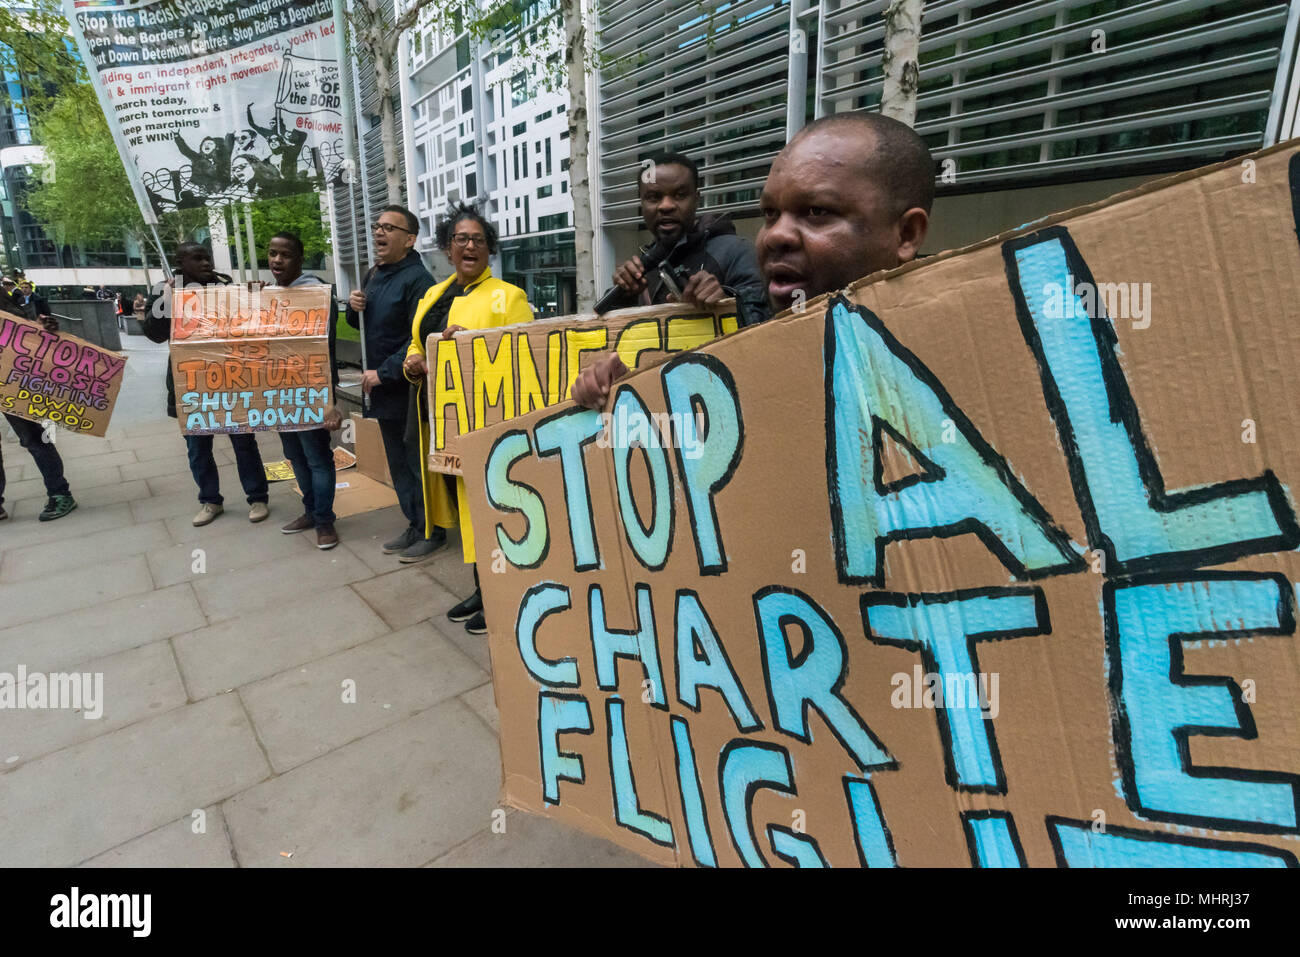 May 1, 2018 - London, UK. 1st May 2018. Protesters hold posters and a banner at the Home Office called by Movement for Justice calling for an end to immigration charter flights. The protest was called as the Home Office intends to carry out a mass deportation to Jamaica in the middle of the Windrush scandal including members of the Windrush generation. The protest at the Home Office and later at the Jamaican High Commission called for an end to these mass deportations, which have led to a rounding up of many who are in this country legally but whose cases are still disputed by the Home Office. Stock Photo